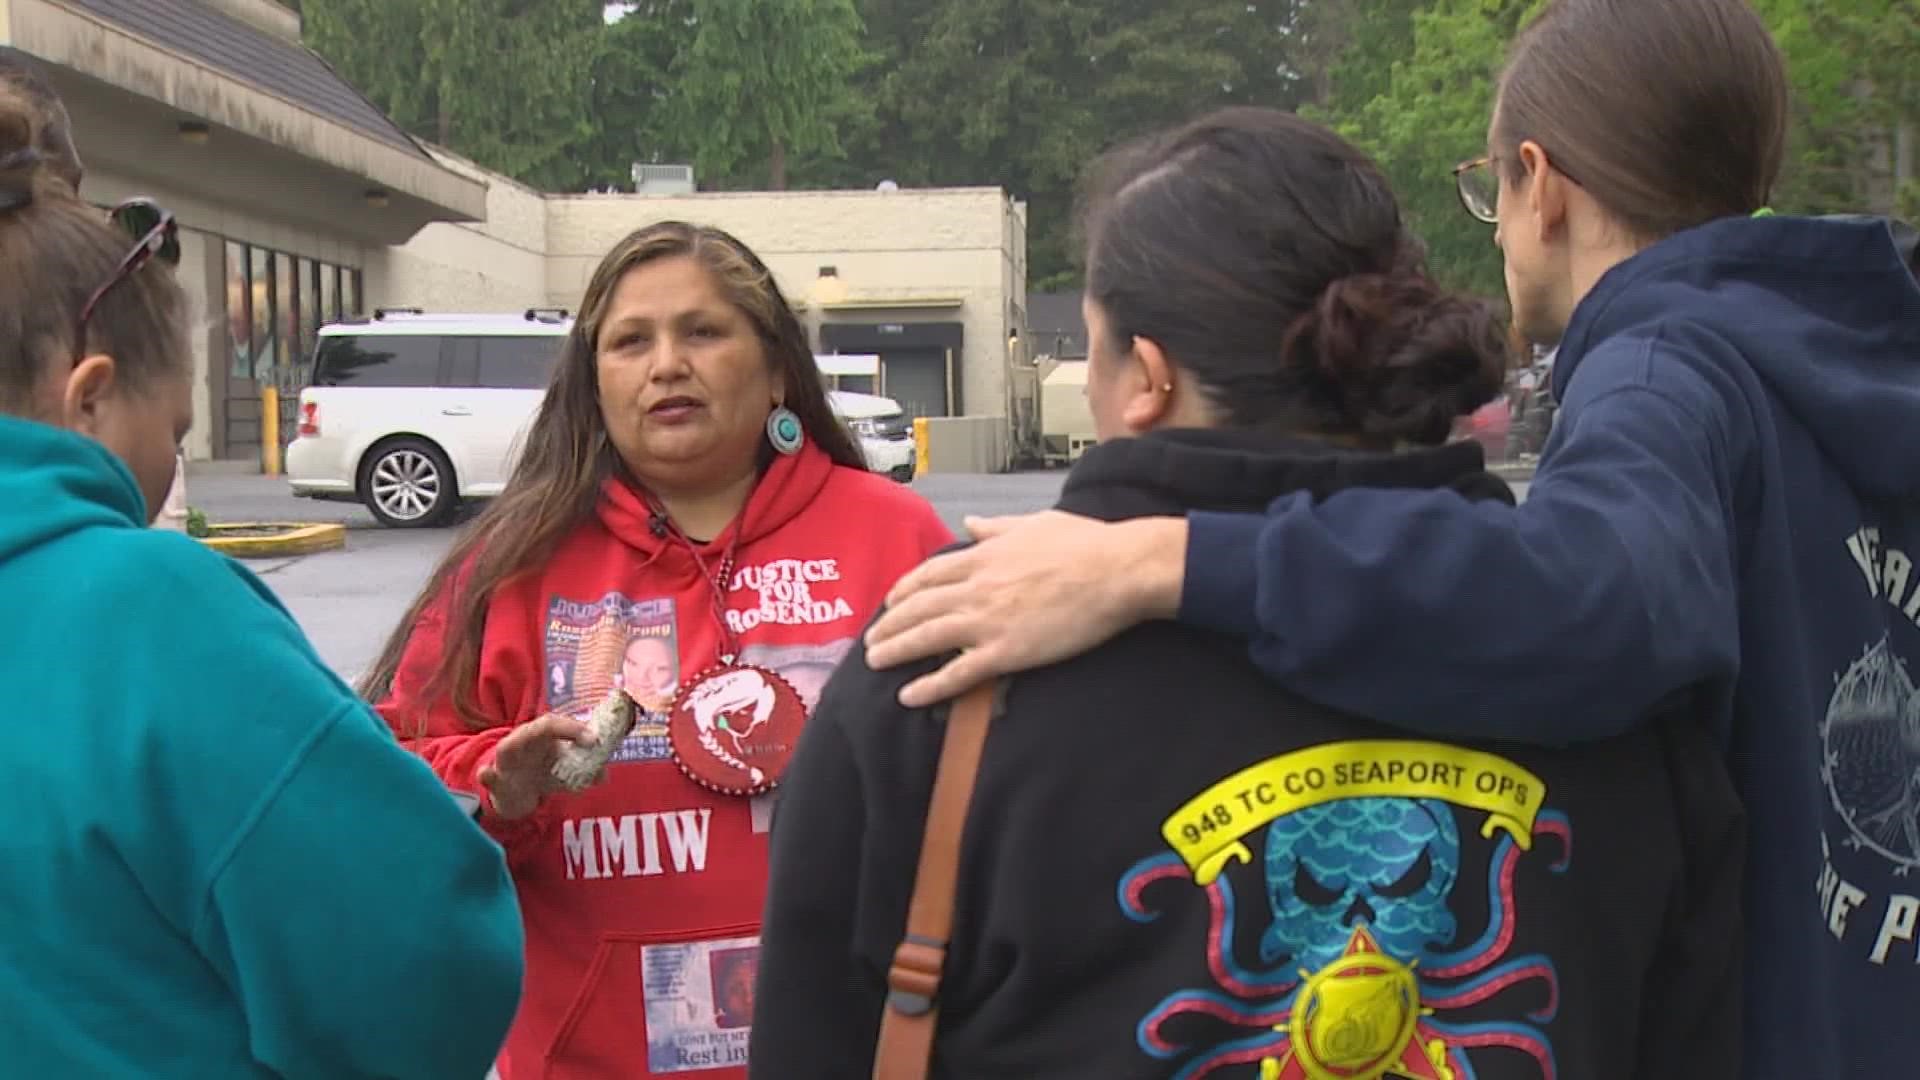 Friends and family say she is a dedicated advocate for preventing domestic violence and sexual assault, and supporting Missing and Murdered Indigenous Women.